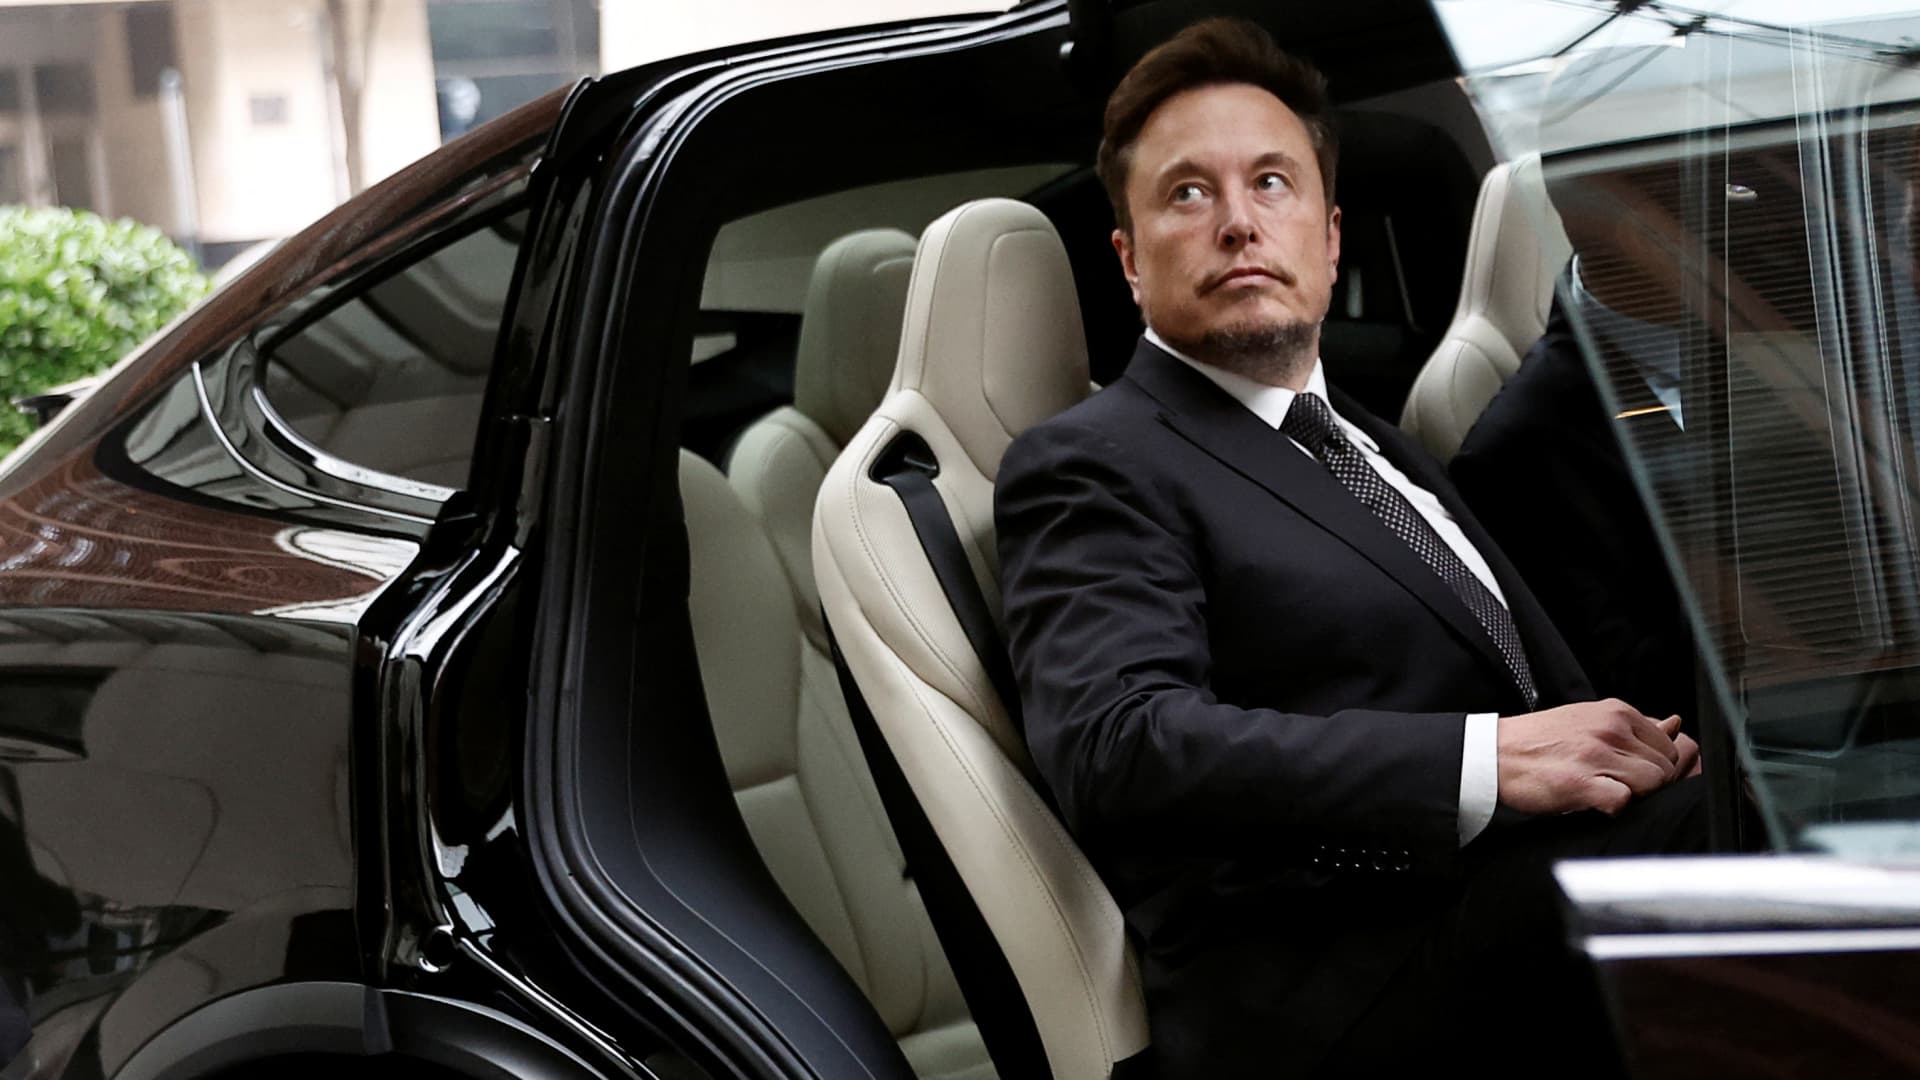 Tesla shares drop 5% after HSBC initiates coverage, says sell